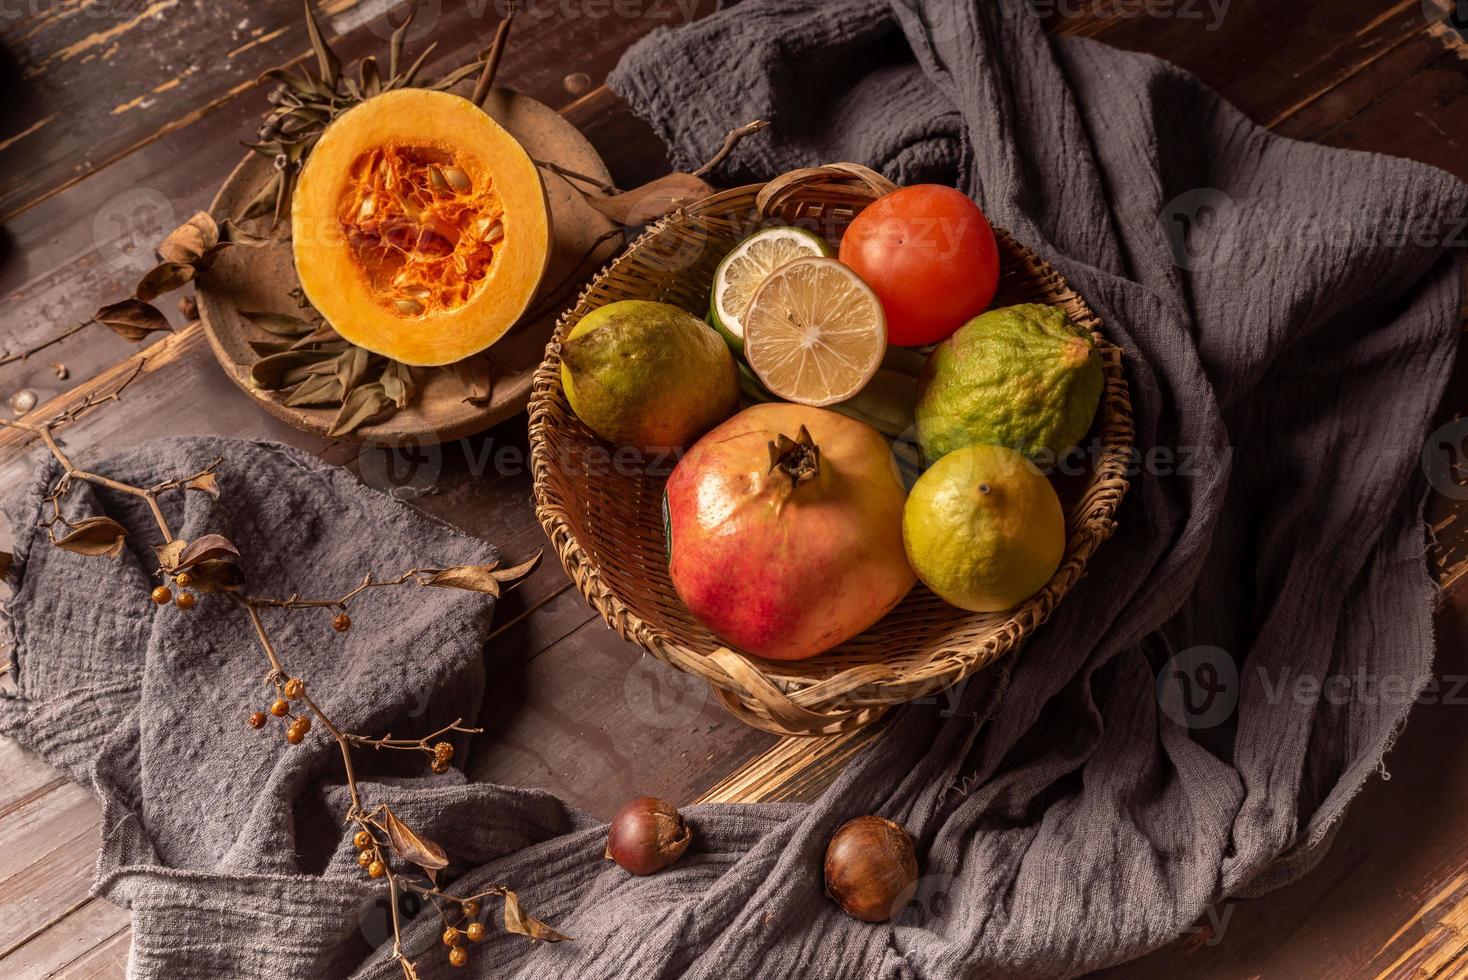 Pumpkins and many other colors and varieties of fruits and vegetables are on the wood grain table photo